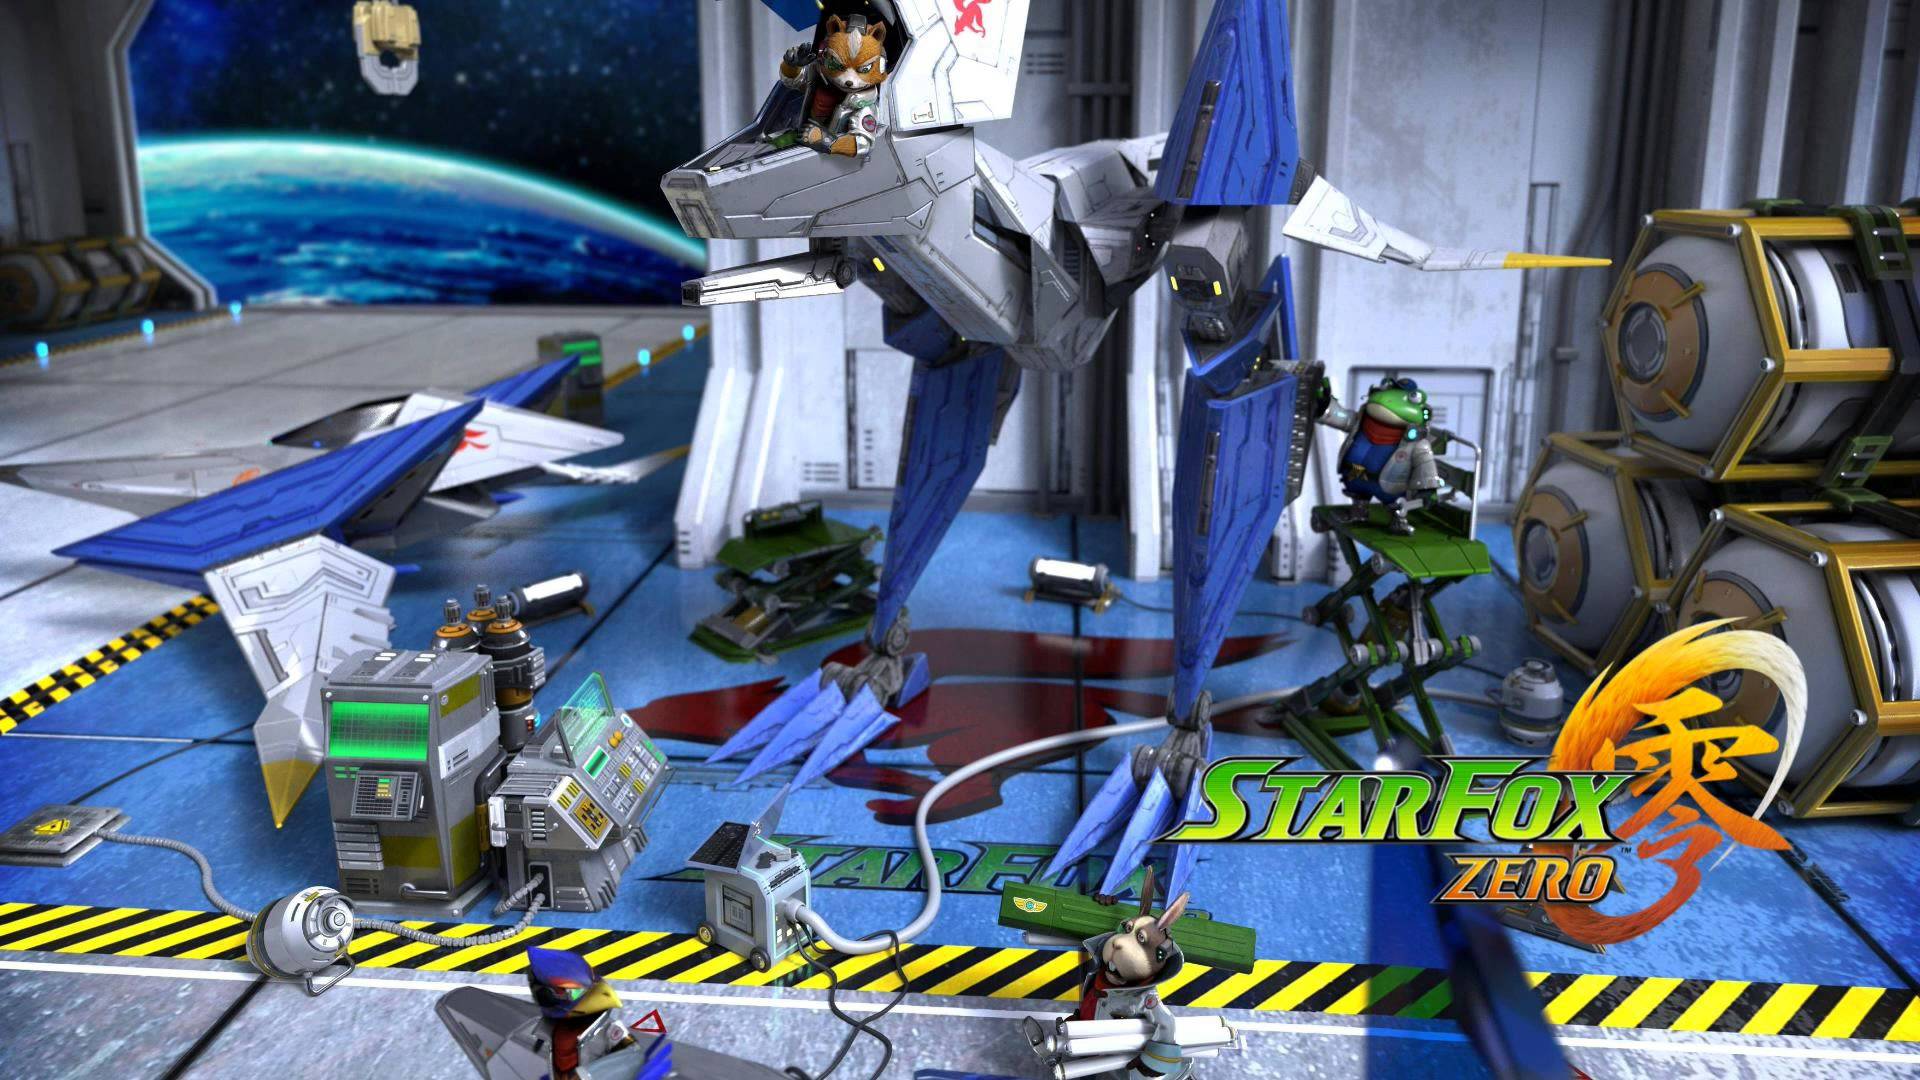 “Star Fox Zero” Will Have “Invincible Arwing” Mode - Invincible Flying Death Machines: Be Very Afraid